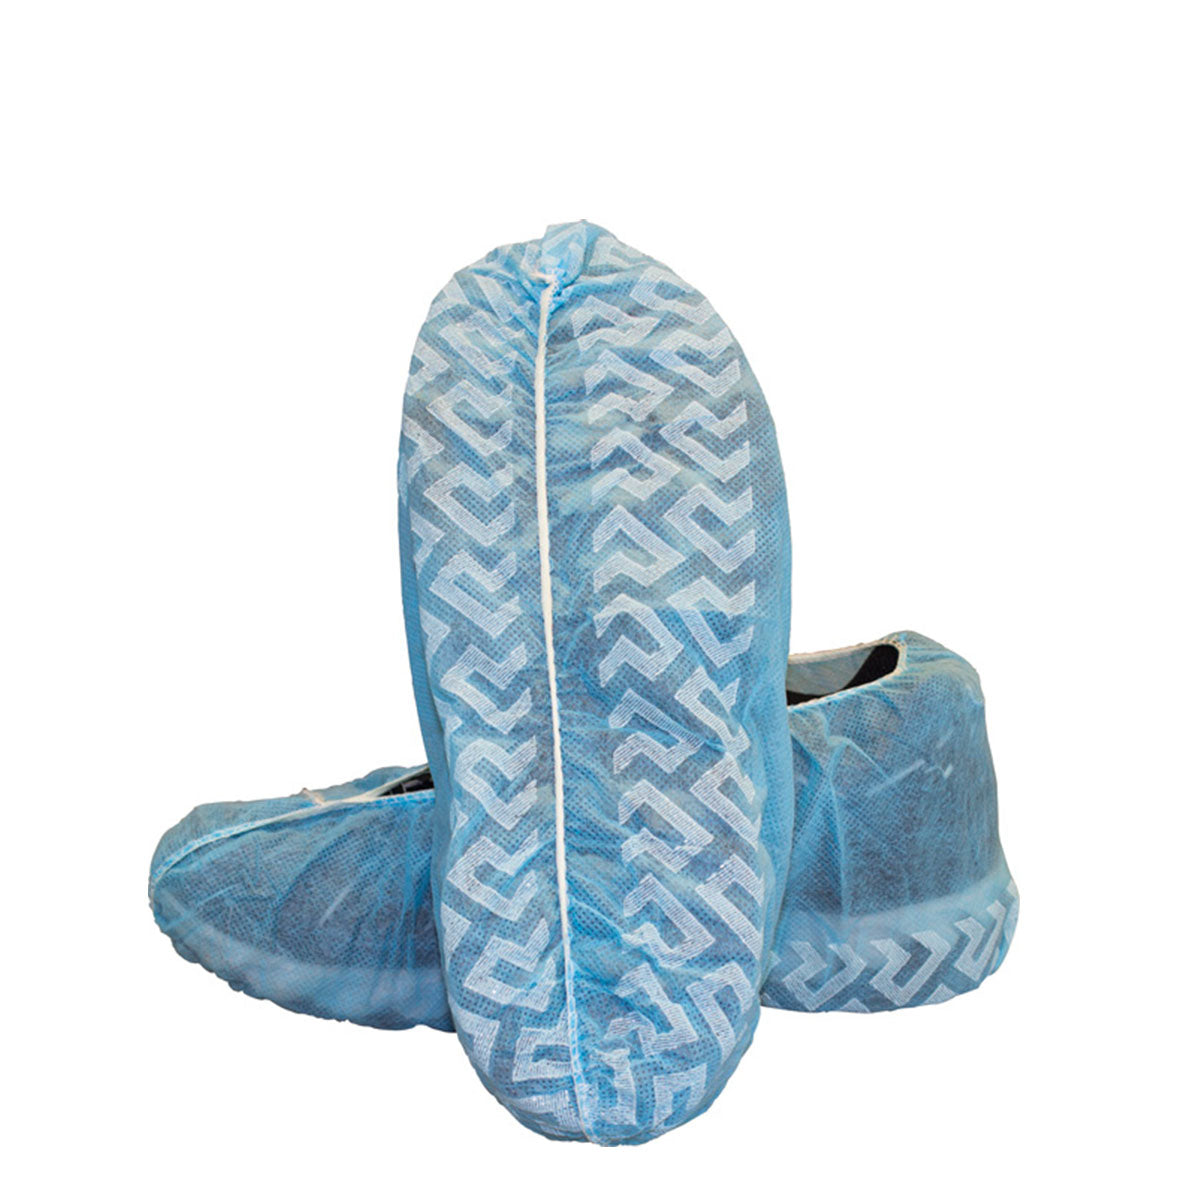  Blue Polypropylene Disposable Shoe Cover with Tread 